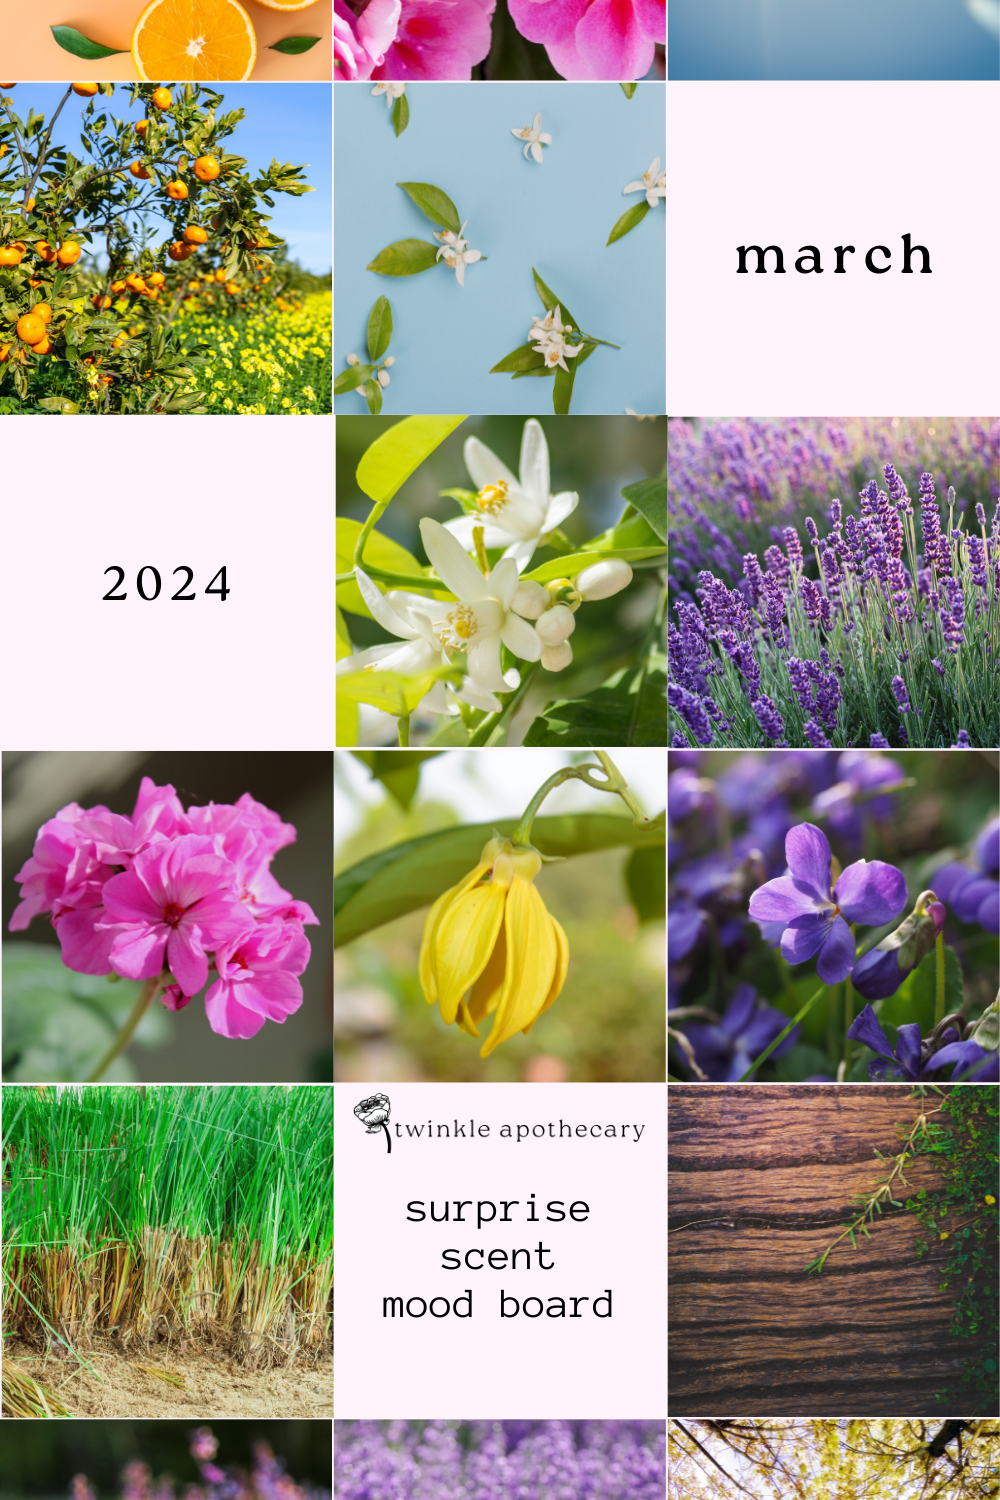 Twinkle Apothecary March 2024 Surprise Scent Mood Board